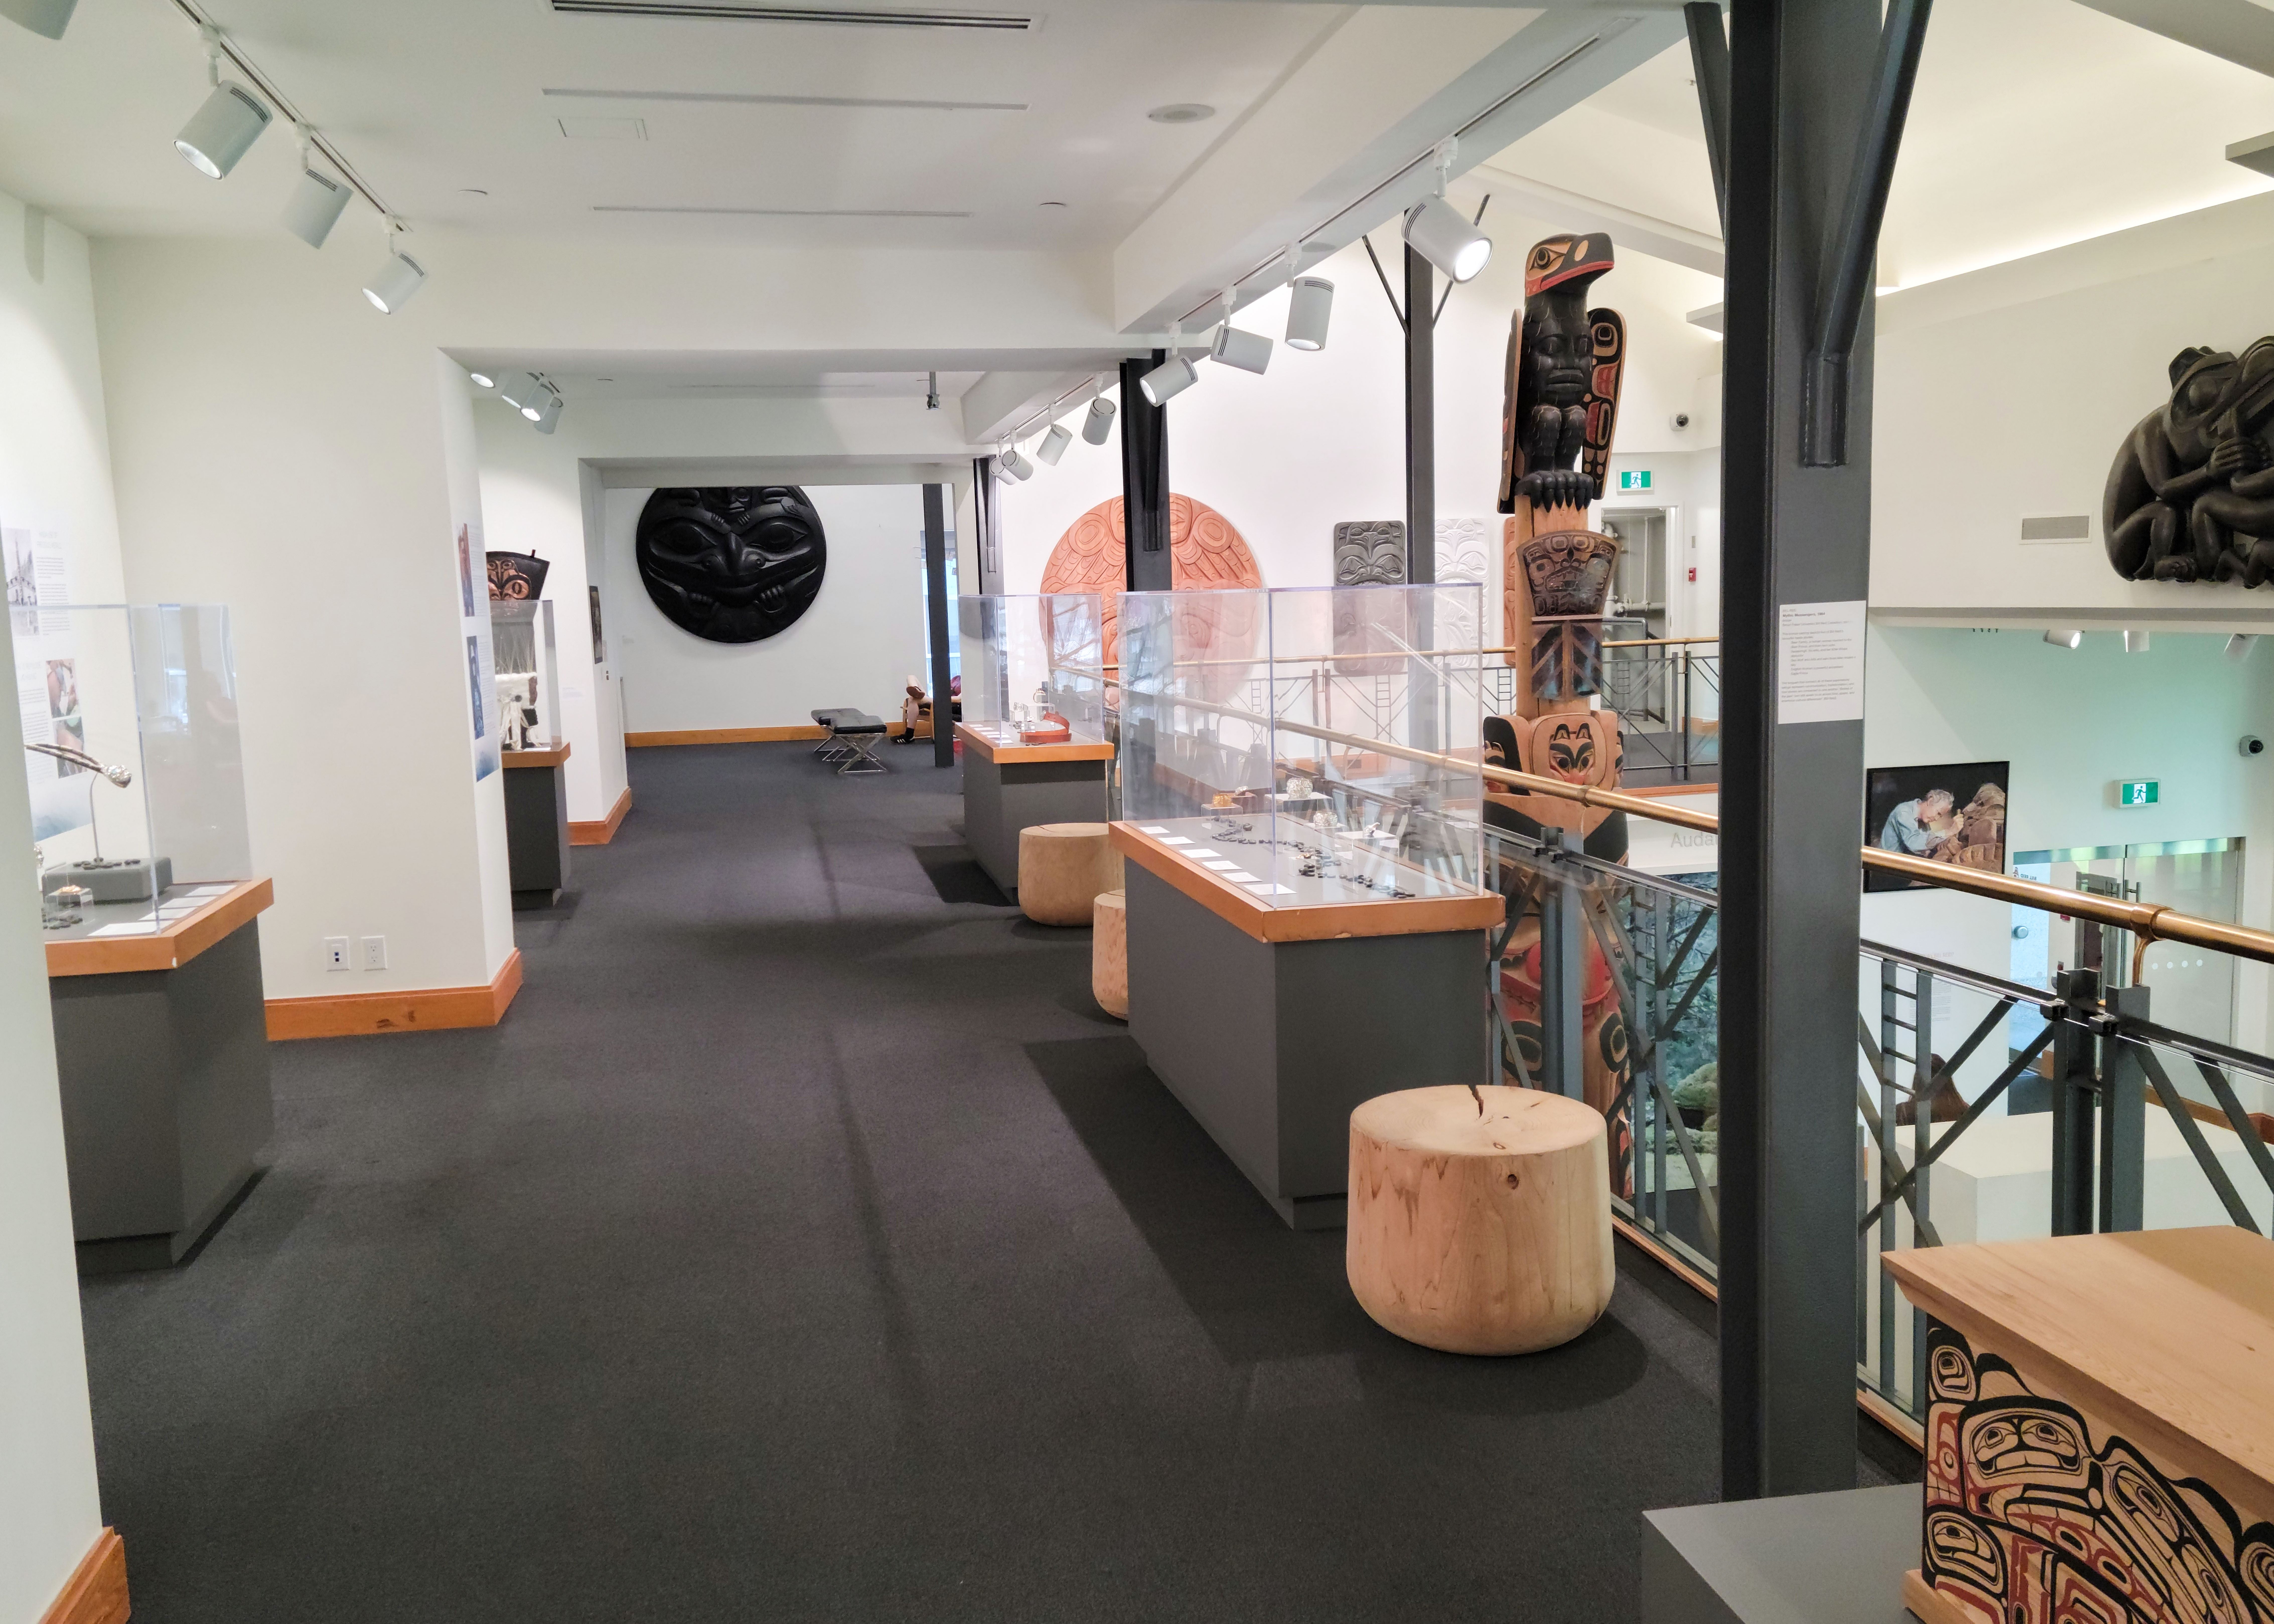 A photo of a corridor on the mezzanine of the Bill Reid Gallery featuring glass cases, Haida-style wood carvings depicting abstract faces and creatures on the wall, and a totem pole emerging from the first floor.